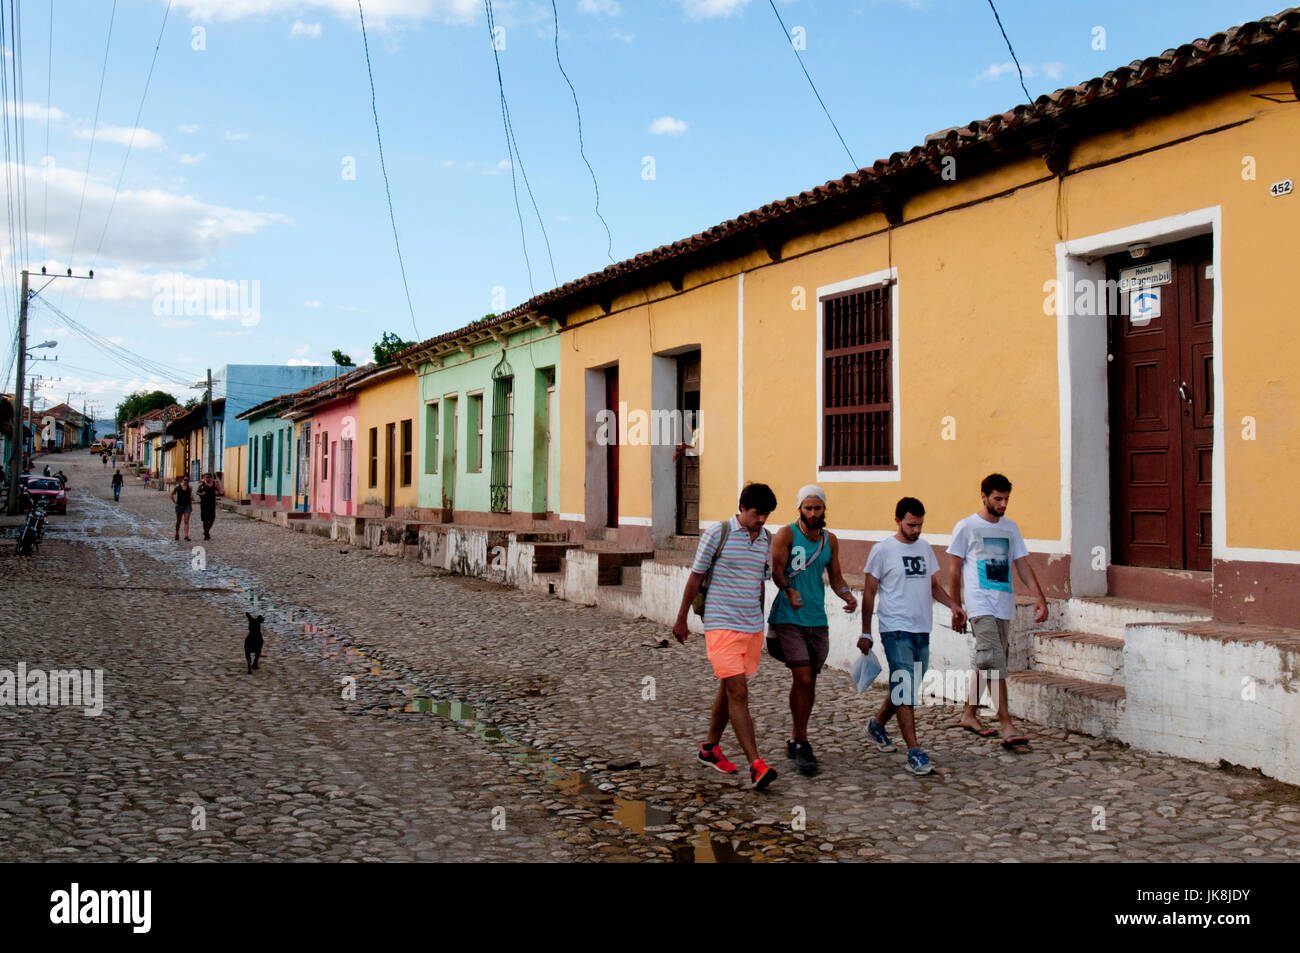 Group of four boys walking down cobblestone street in old part of Trinidad, Cuba Stock Photo